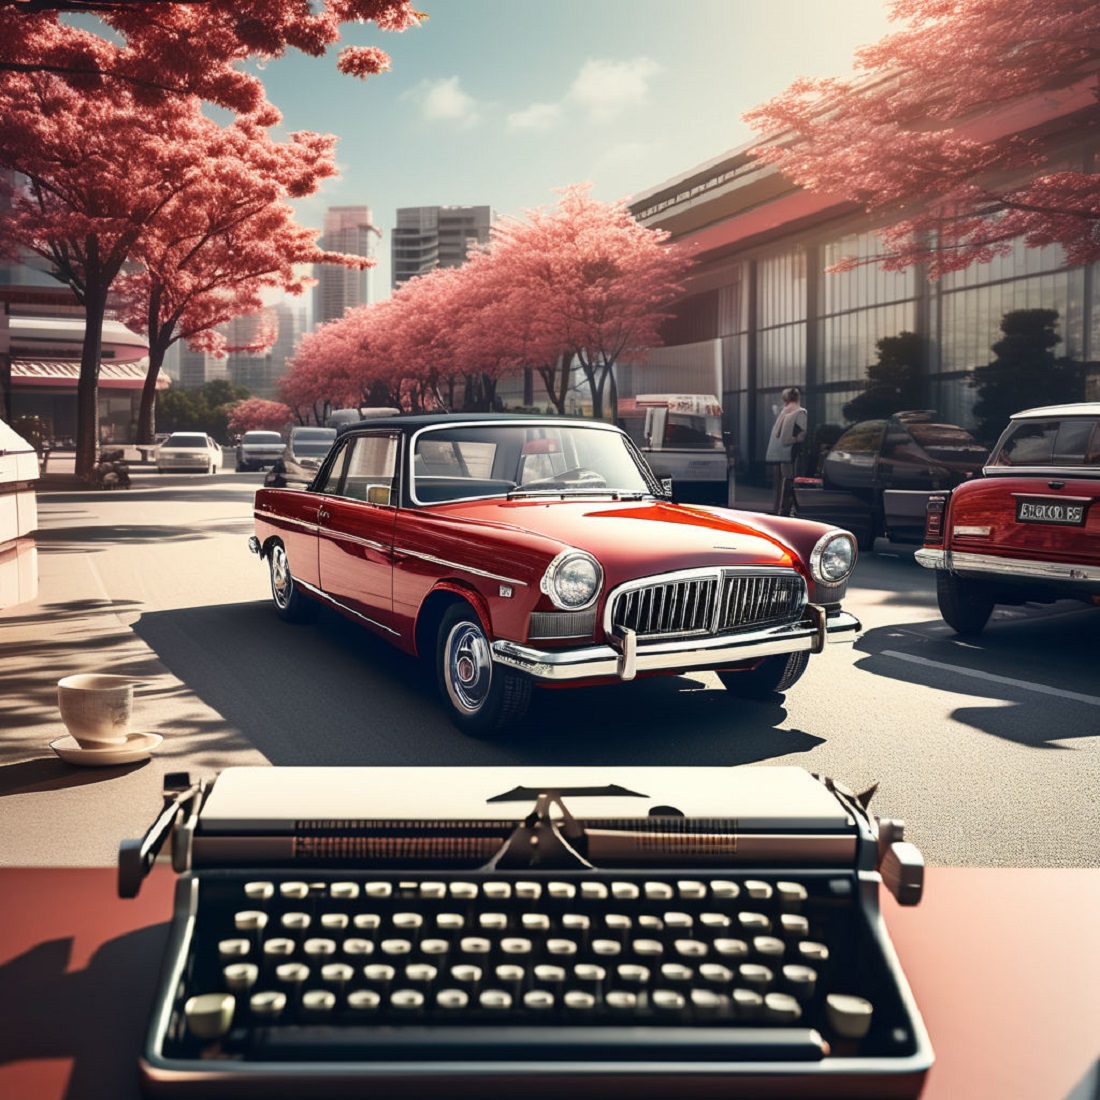 4 excellent retro cars in seasoned tones with soft shadows in a realistic style preview image.